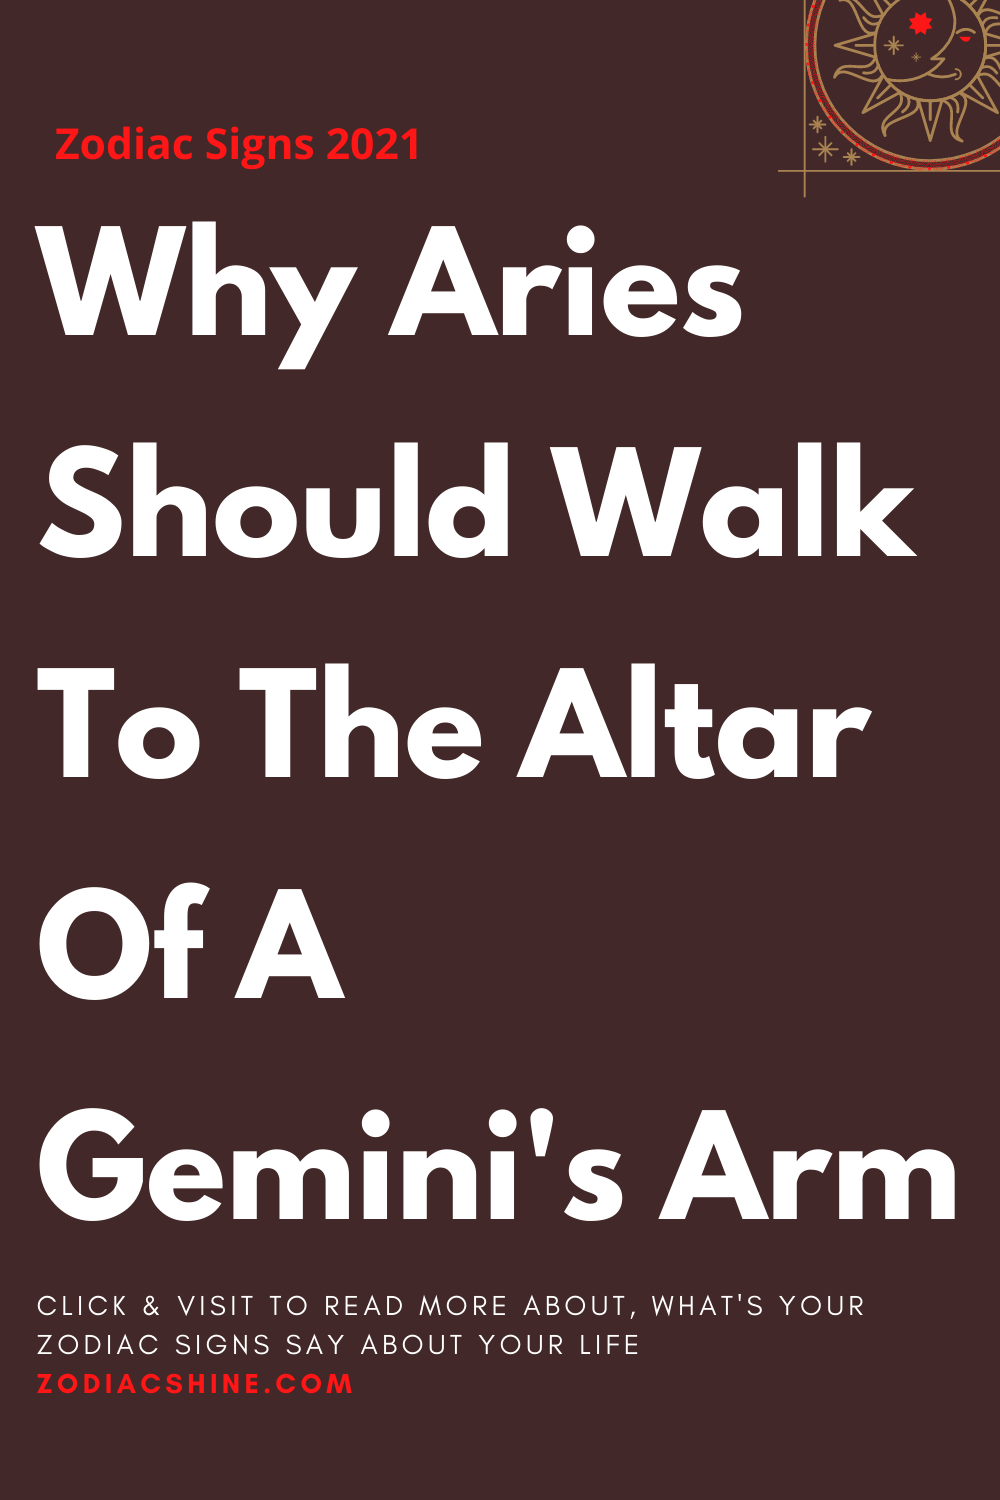 Why Aries Should Walk To The Altar Of A Gemini's Arm